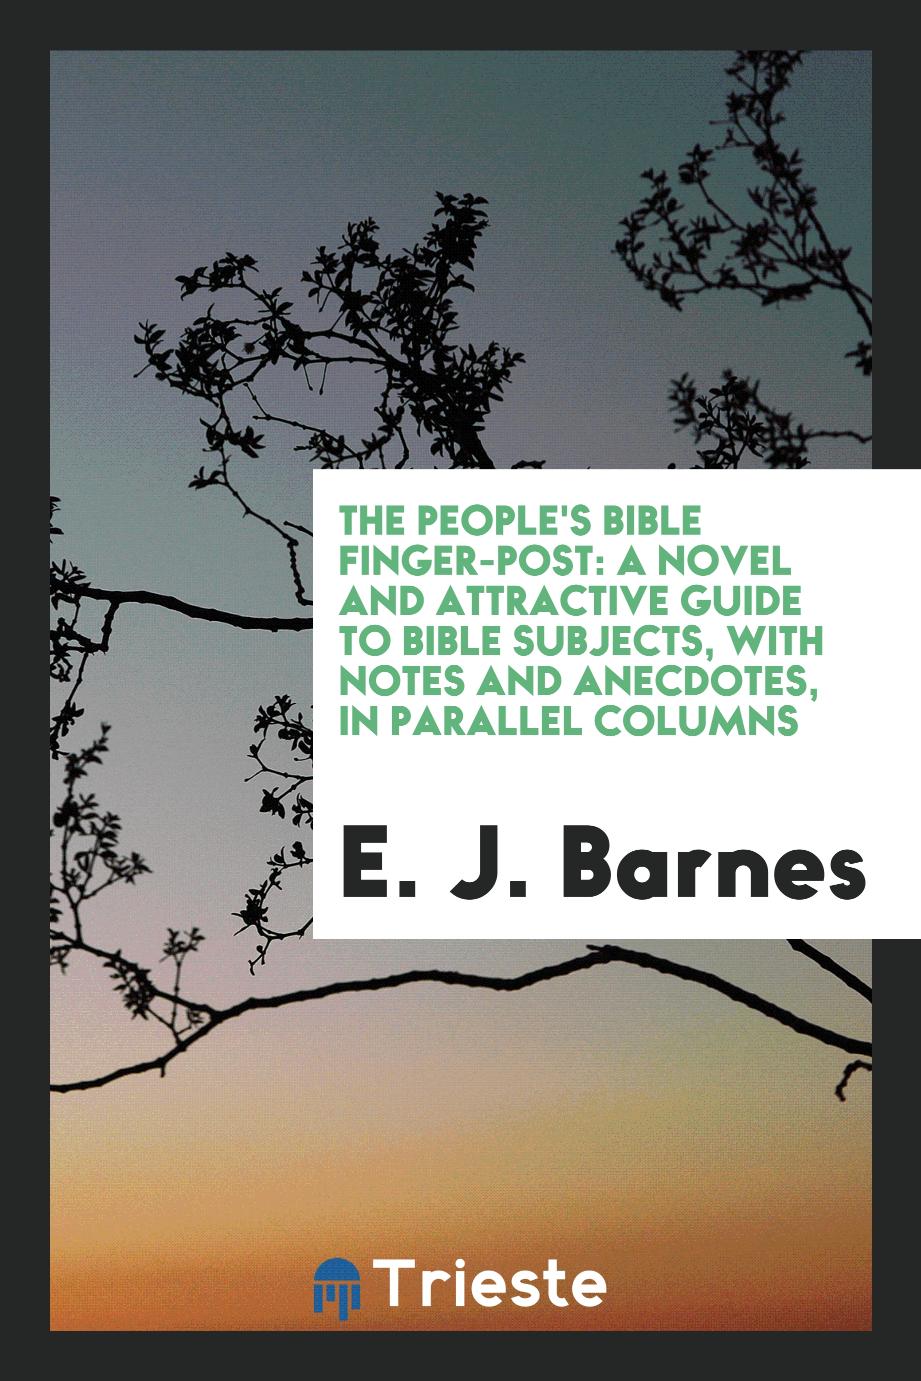 The People's Bible Finger-Post: A Novel and Attractive Guide to Bible Subjects, with Notes and Anecdotes, in Parallel Columns